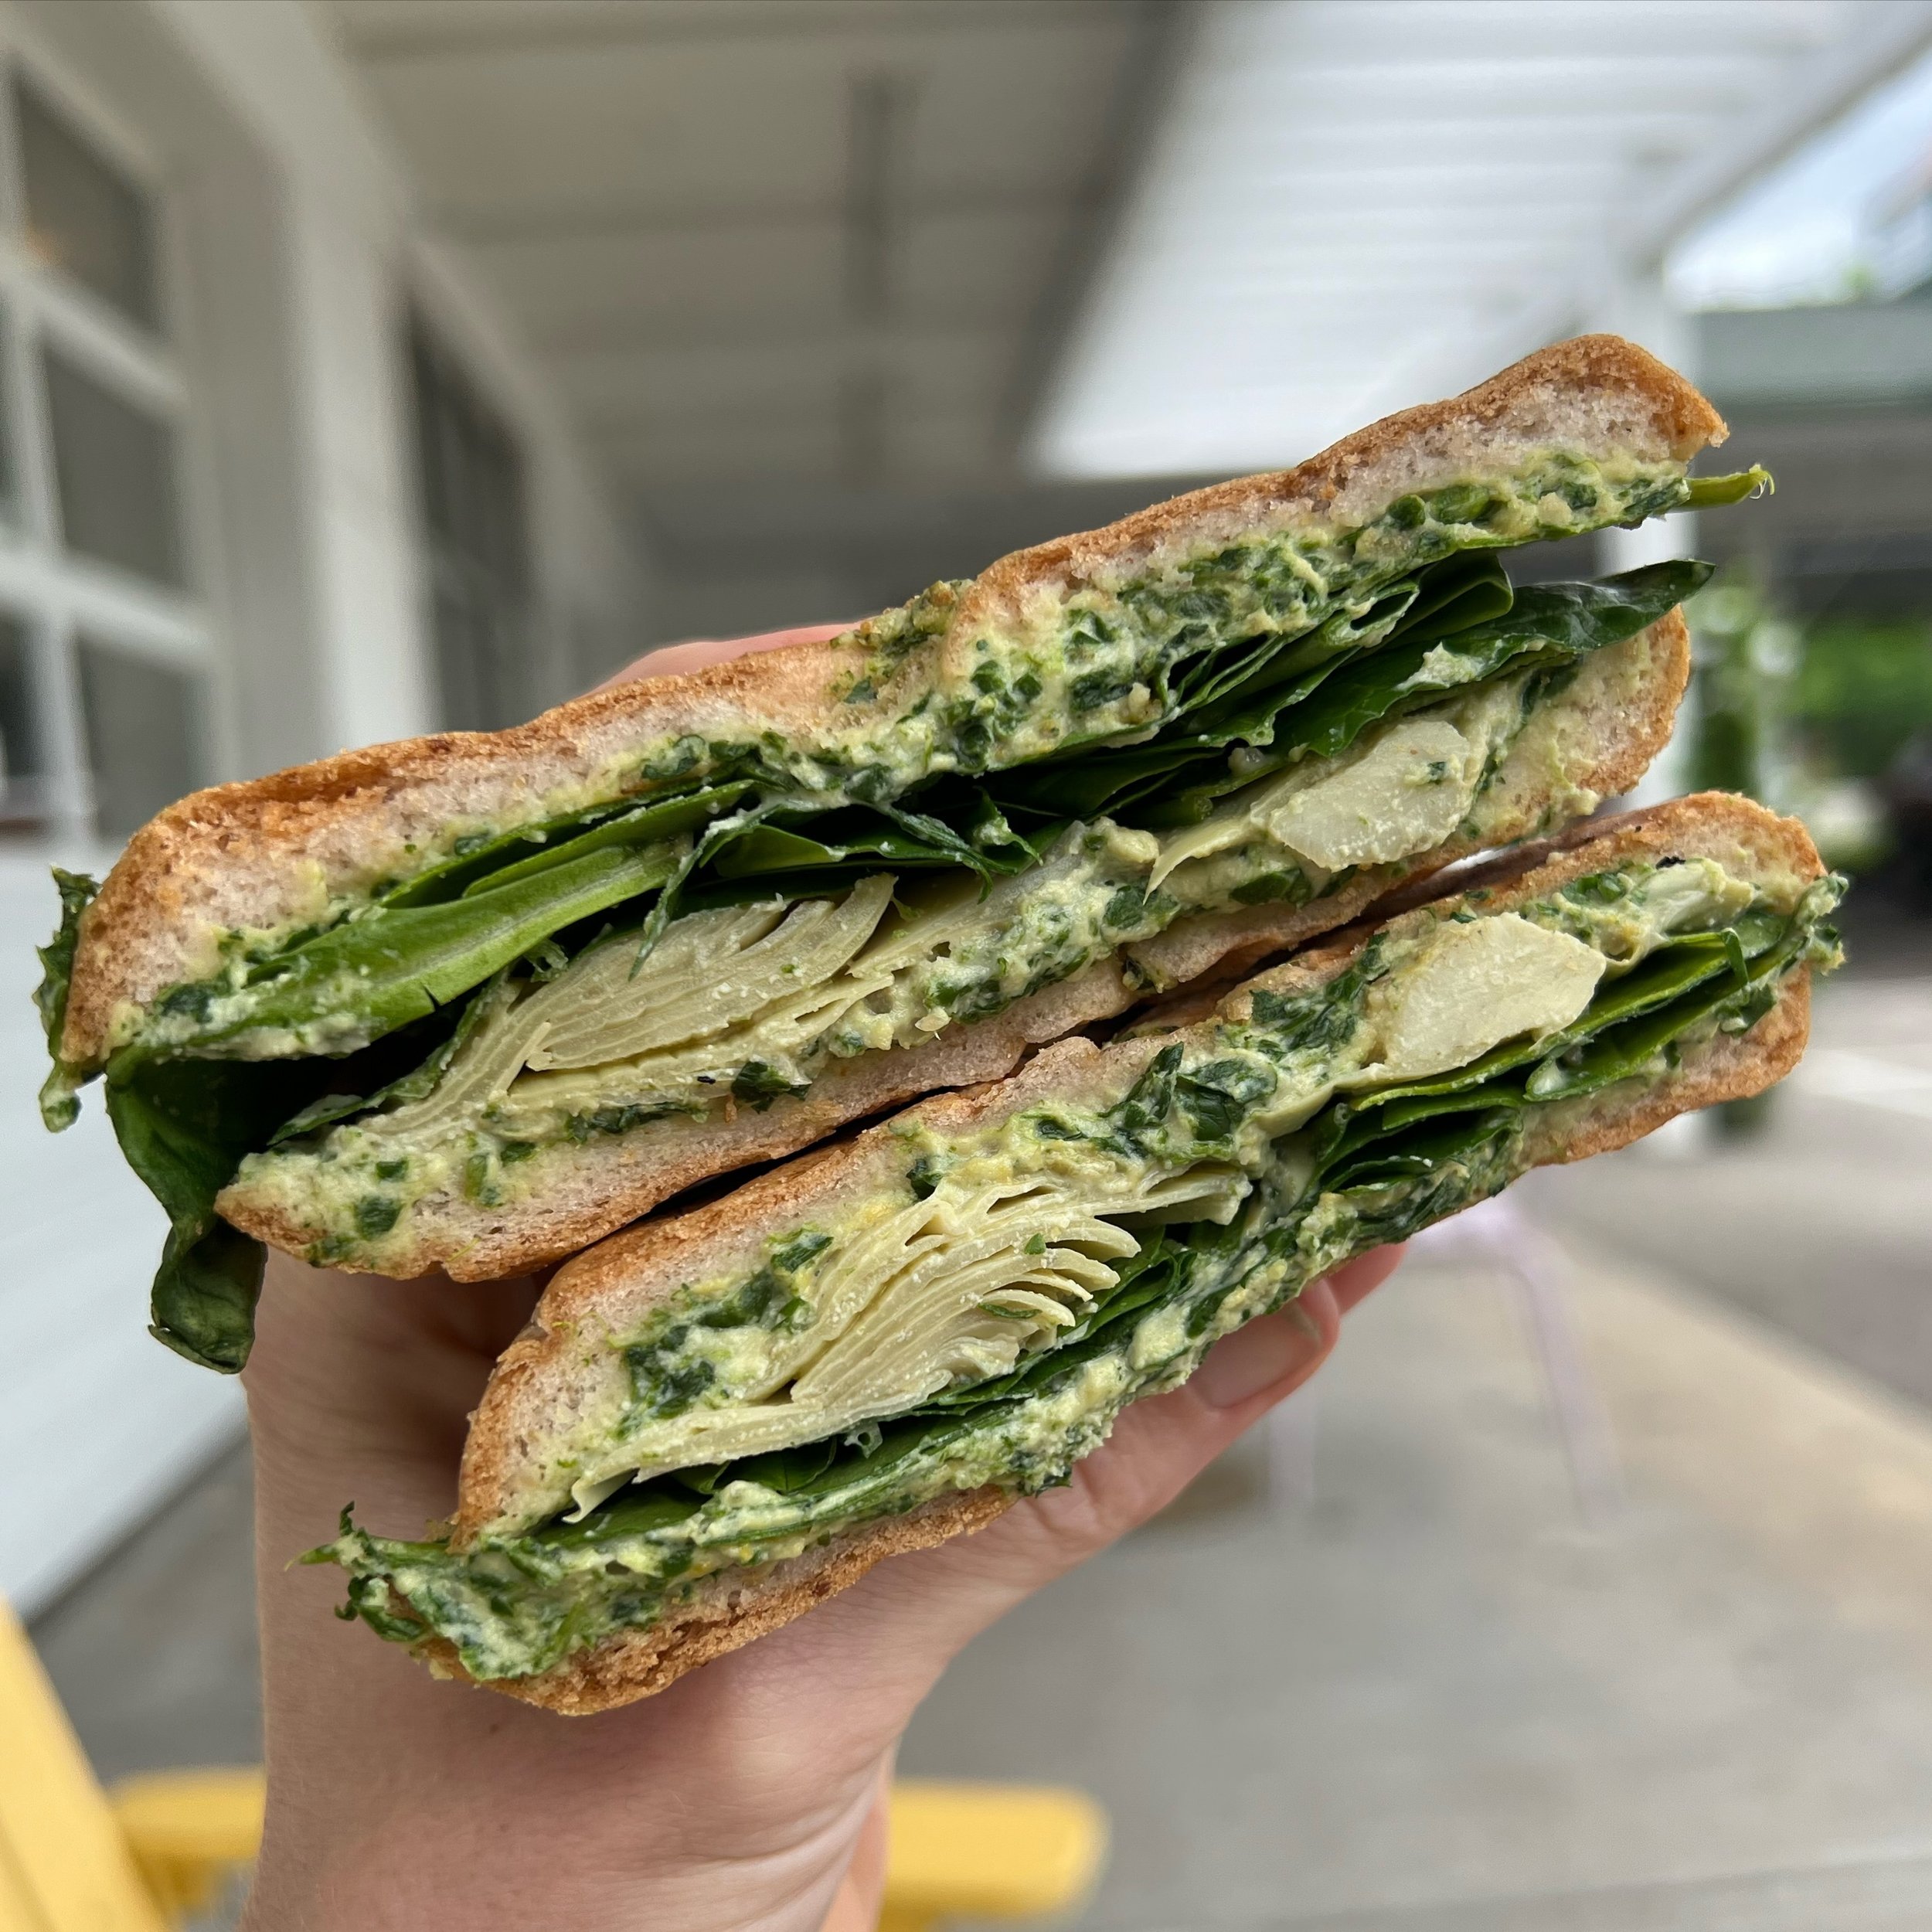 Did you know you can substitute a gluten free bagel for the usual sourdough on any of our house-made sandwiches? It gets even better for our gluten free friends: there is no extra charge. 🥯🥪

Pictured here: Spinach Artichoke Toasted ChZ on a gluten